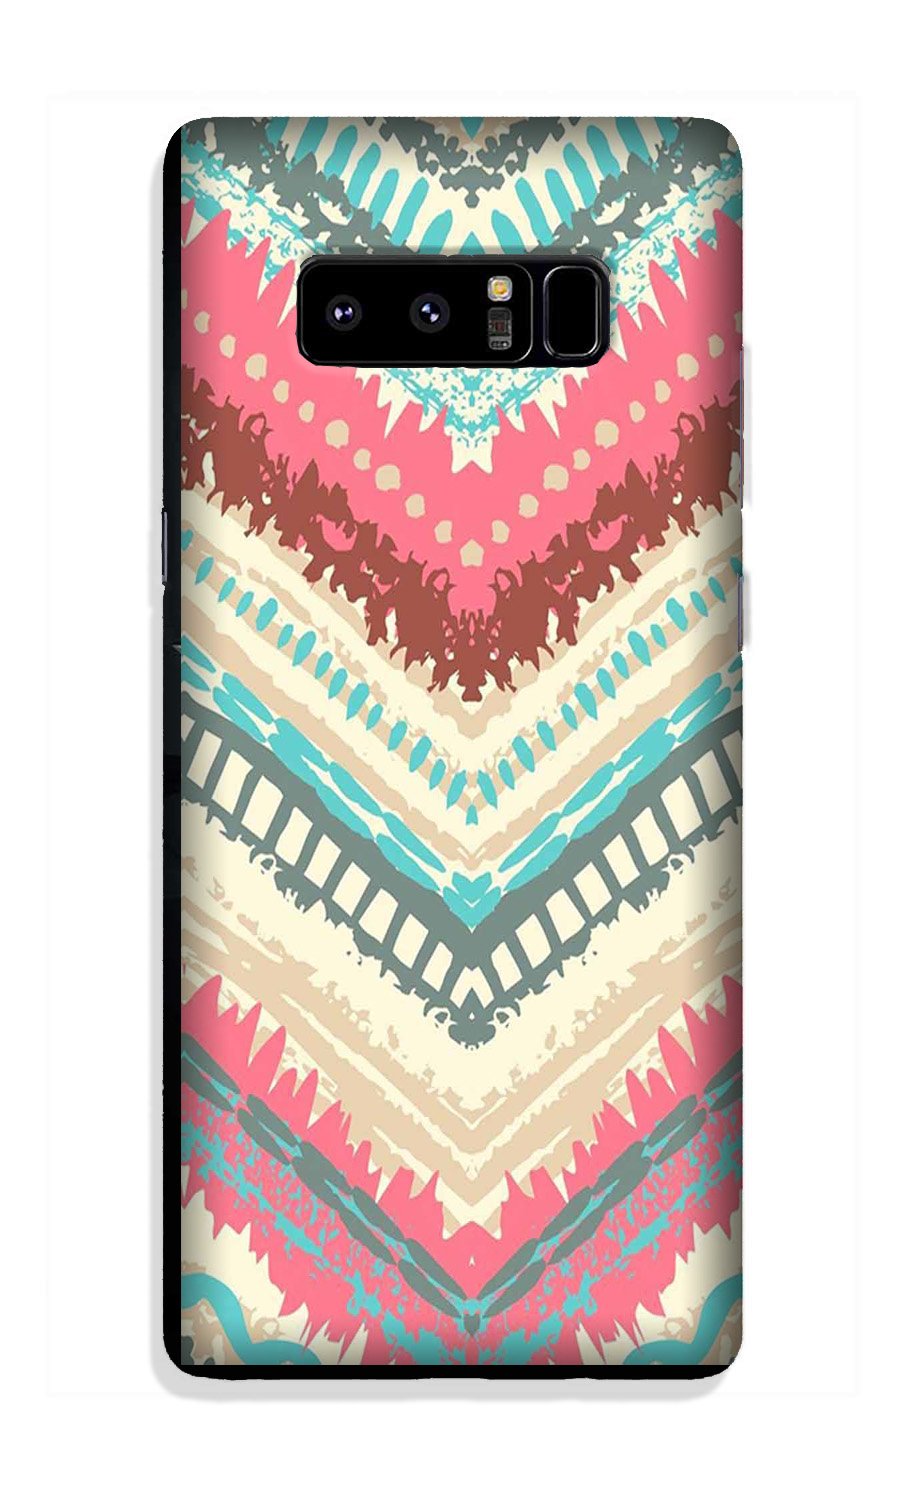 Pattern Mobile Back Case for Galaxy Note 8 (Design - 368)